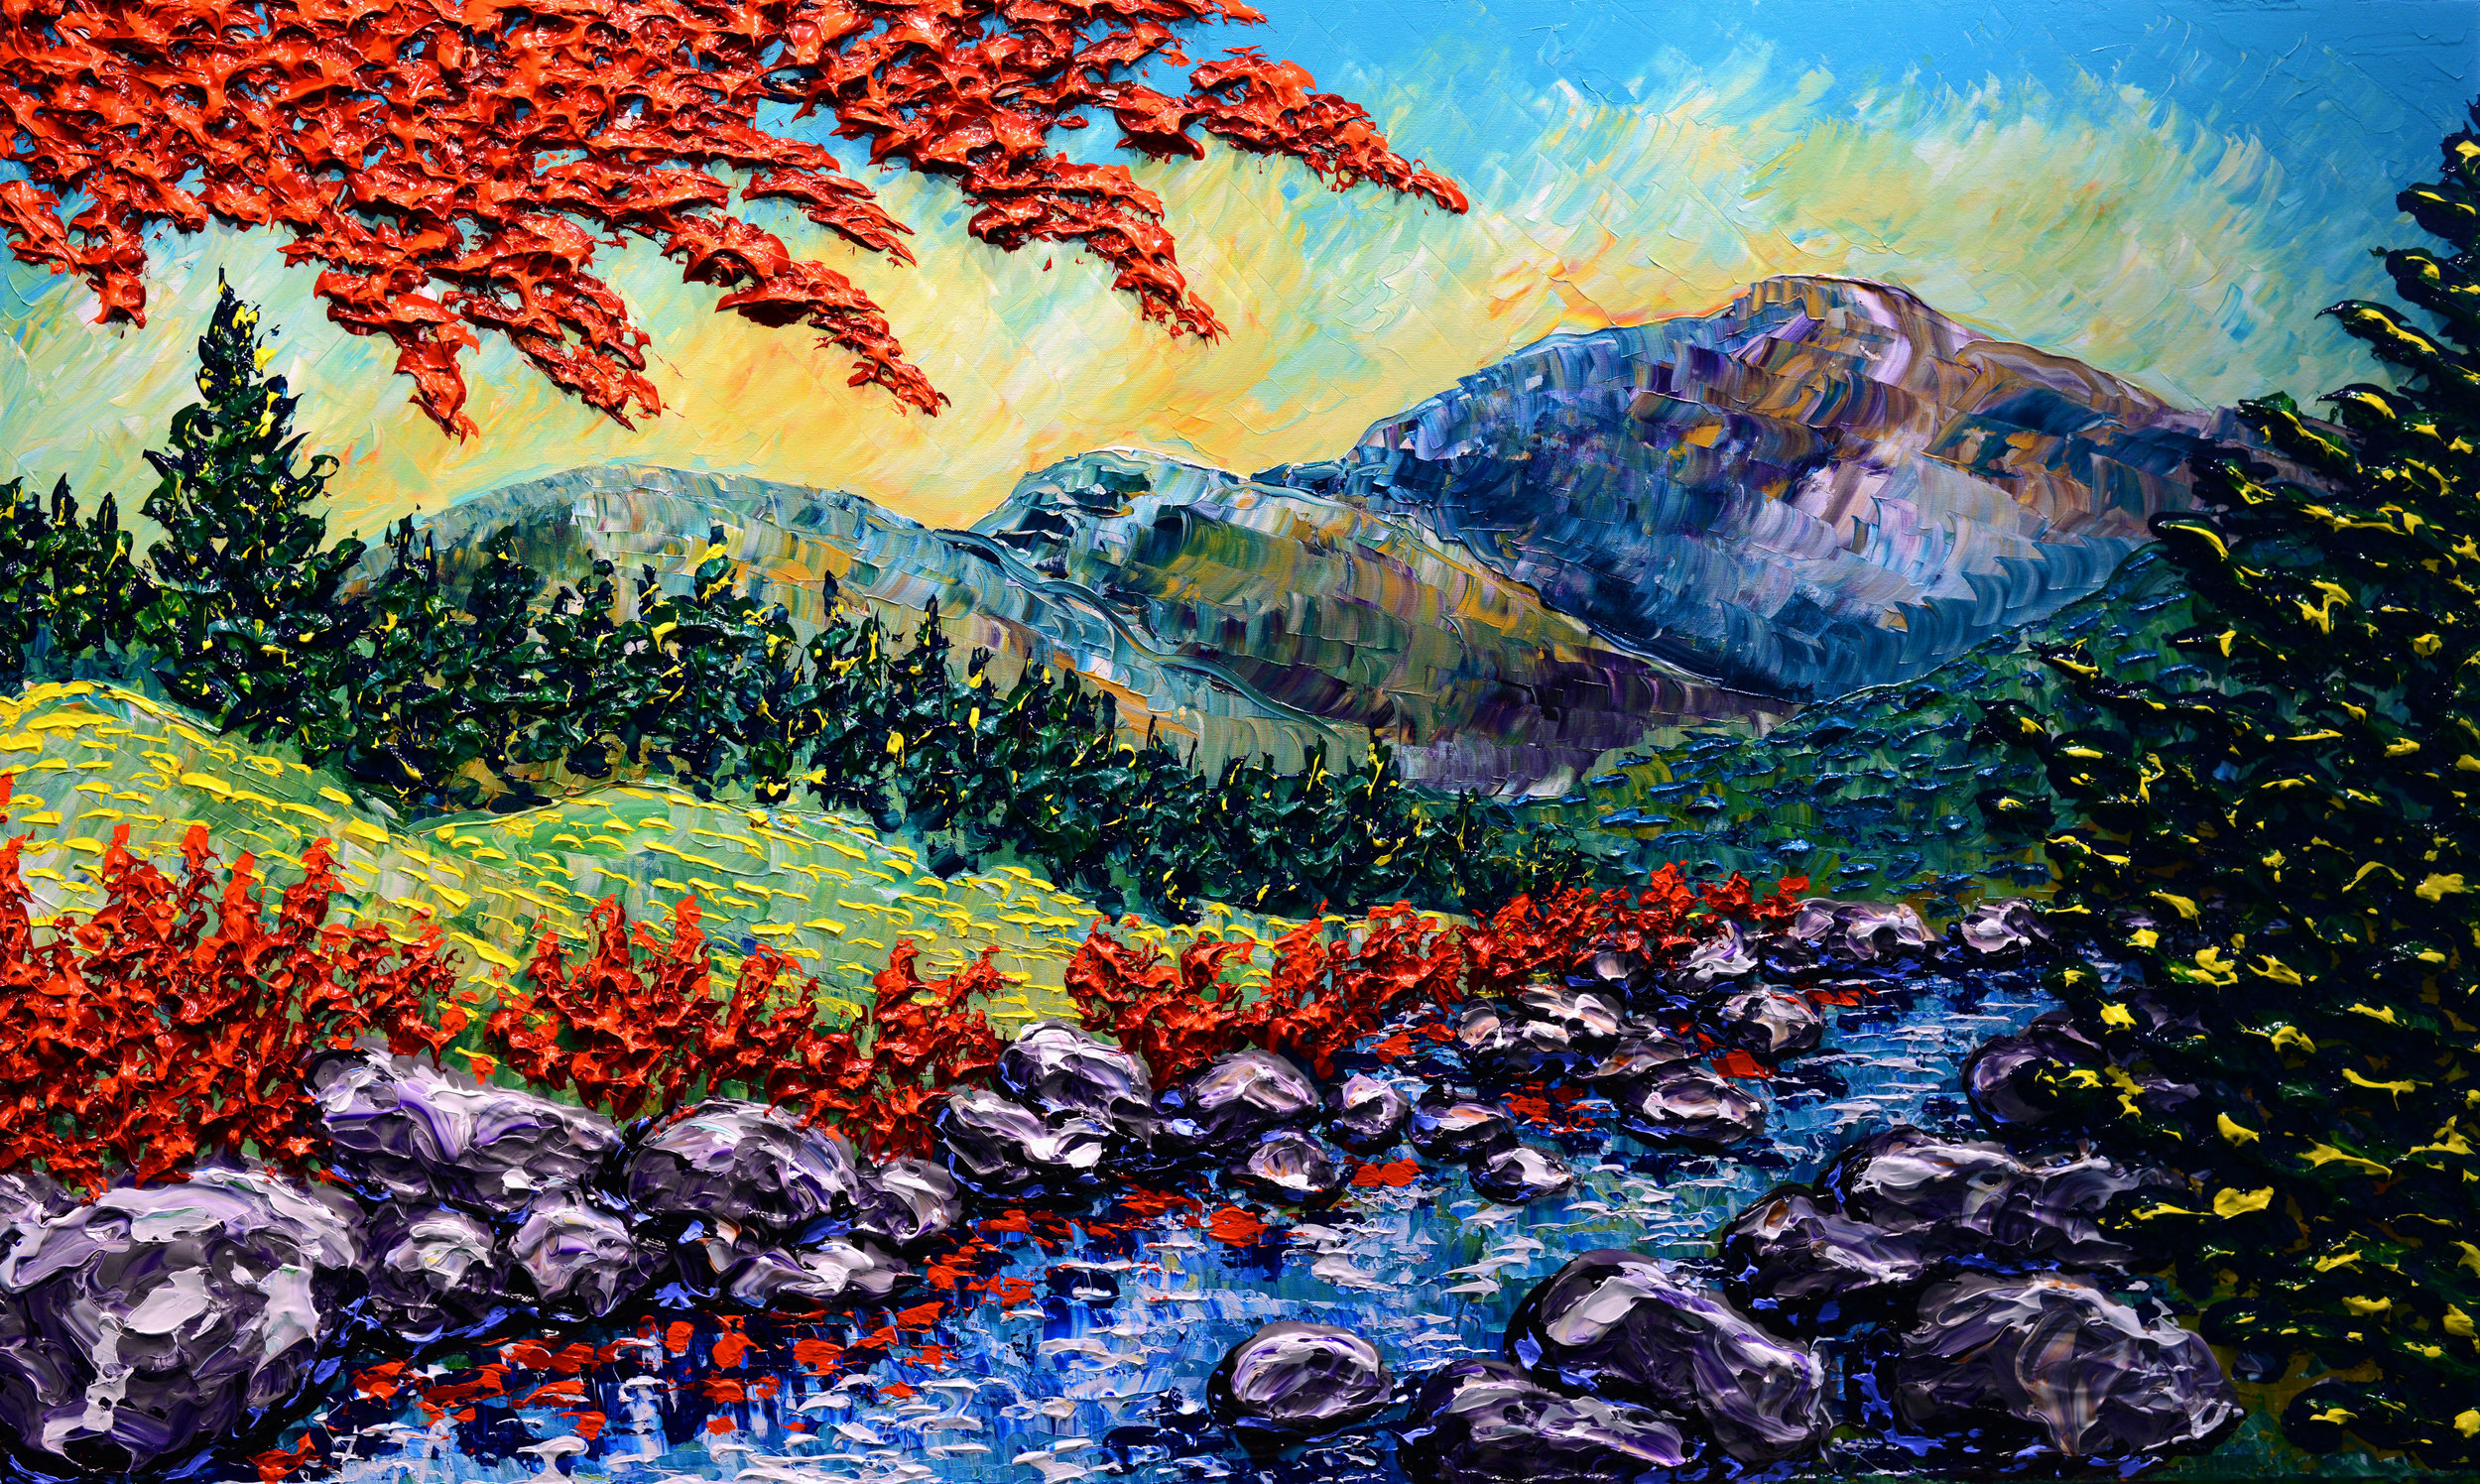 “Reflective Waters of Early Autumn”, 36x60